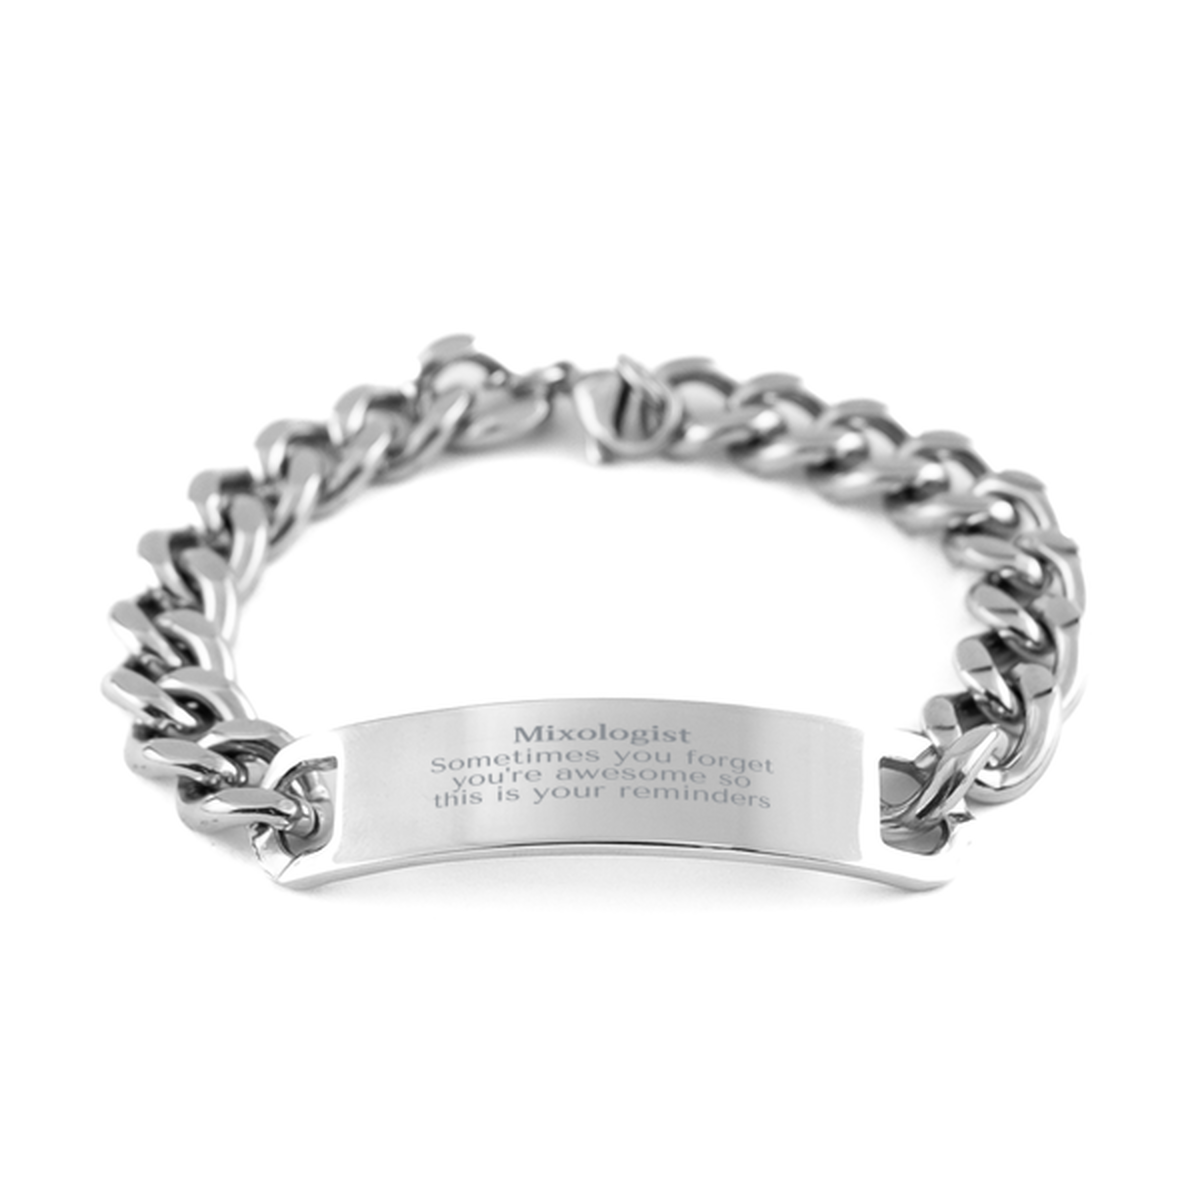 Sentimental Mixologist Cuban Chain Stainless Steel Bracelet, Mixologist Sometimes you forget you're awesome so this is your reminders, Graduation Christmas Birthday Gifts for Mixologist, Men, Women, Coworkers